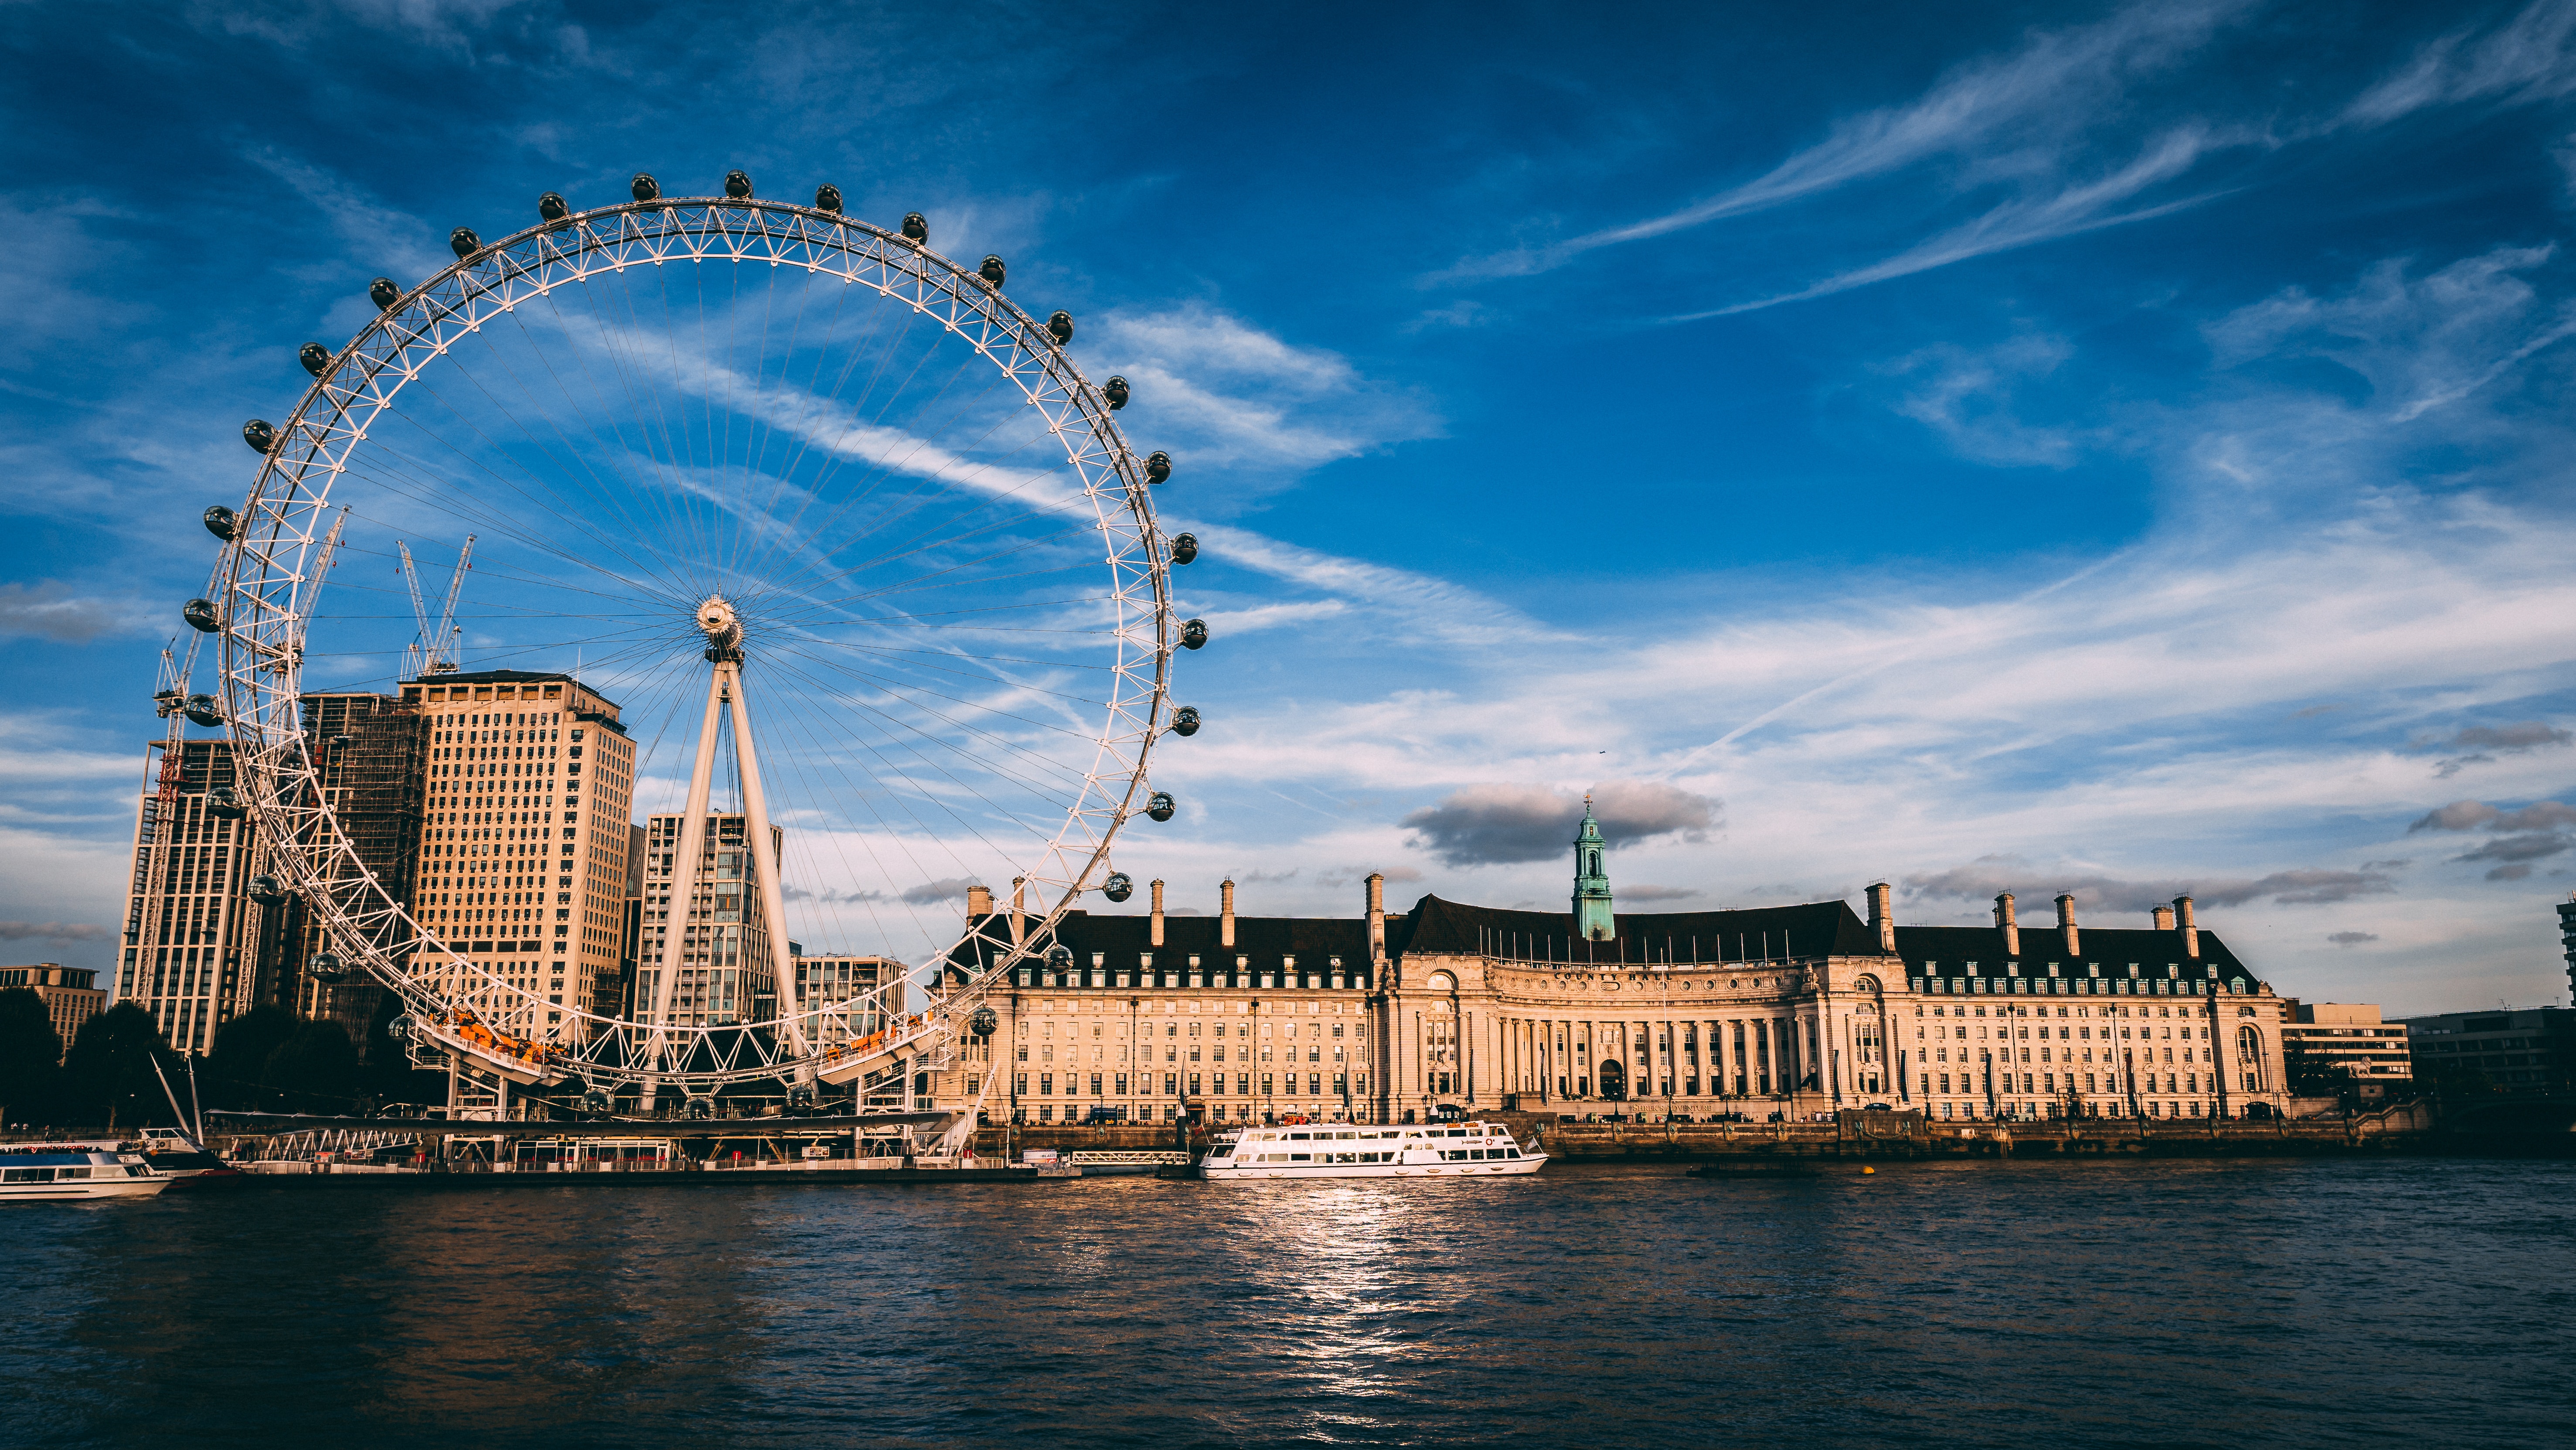 Iconic buildings: London Eye facts